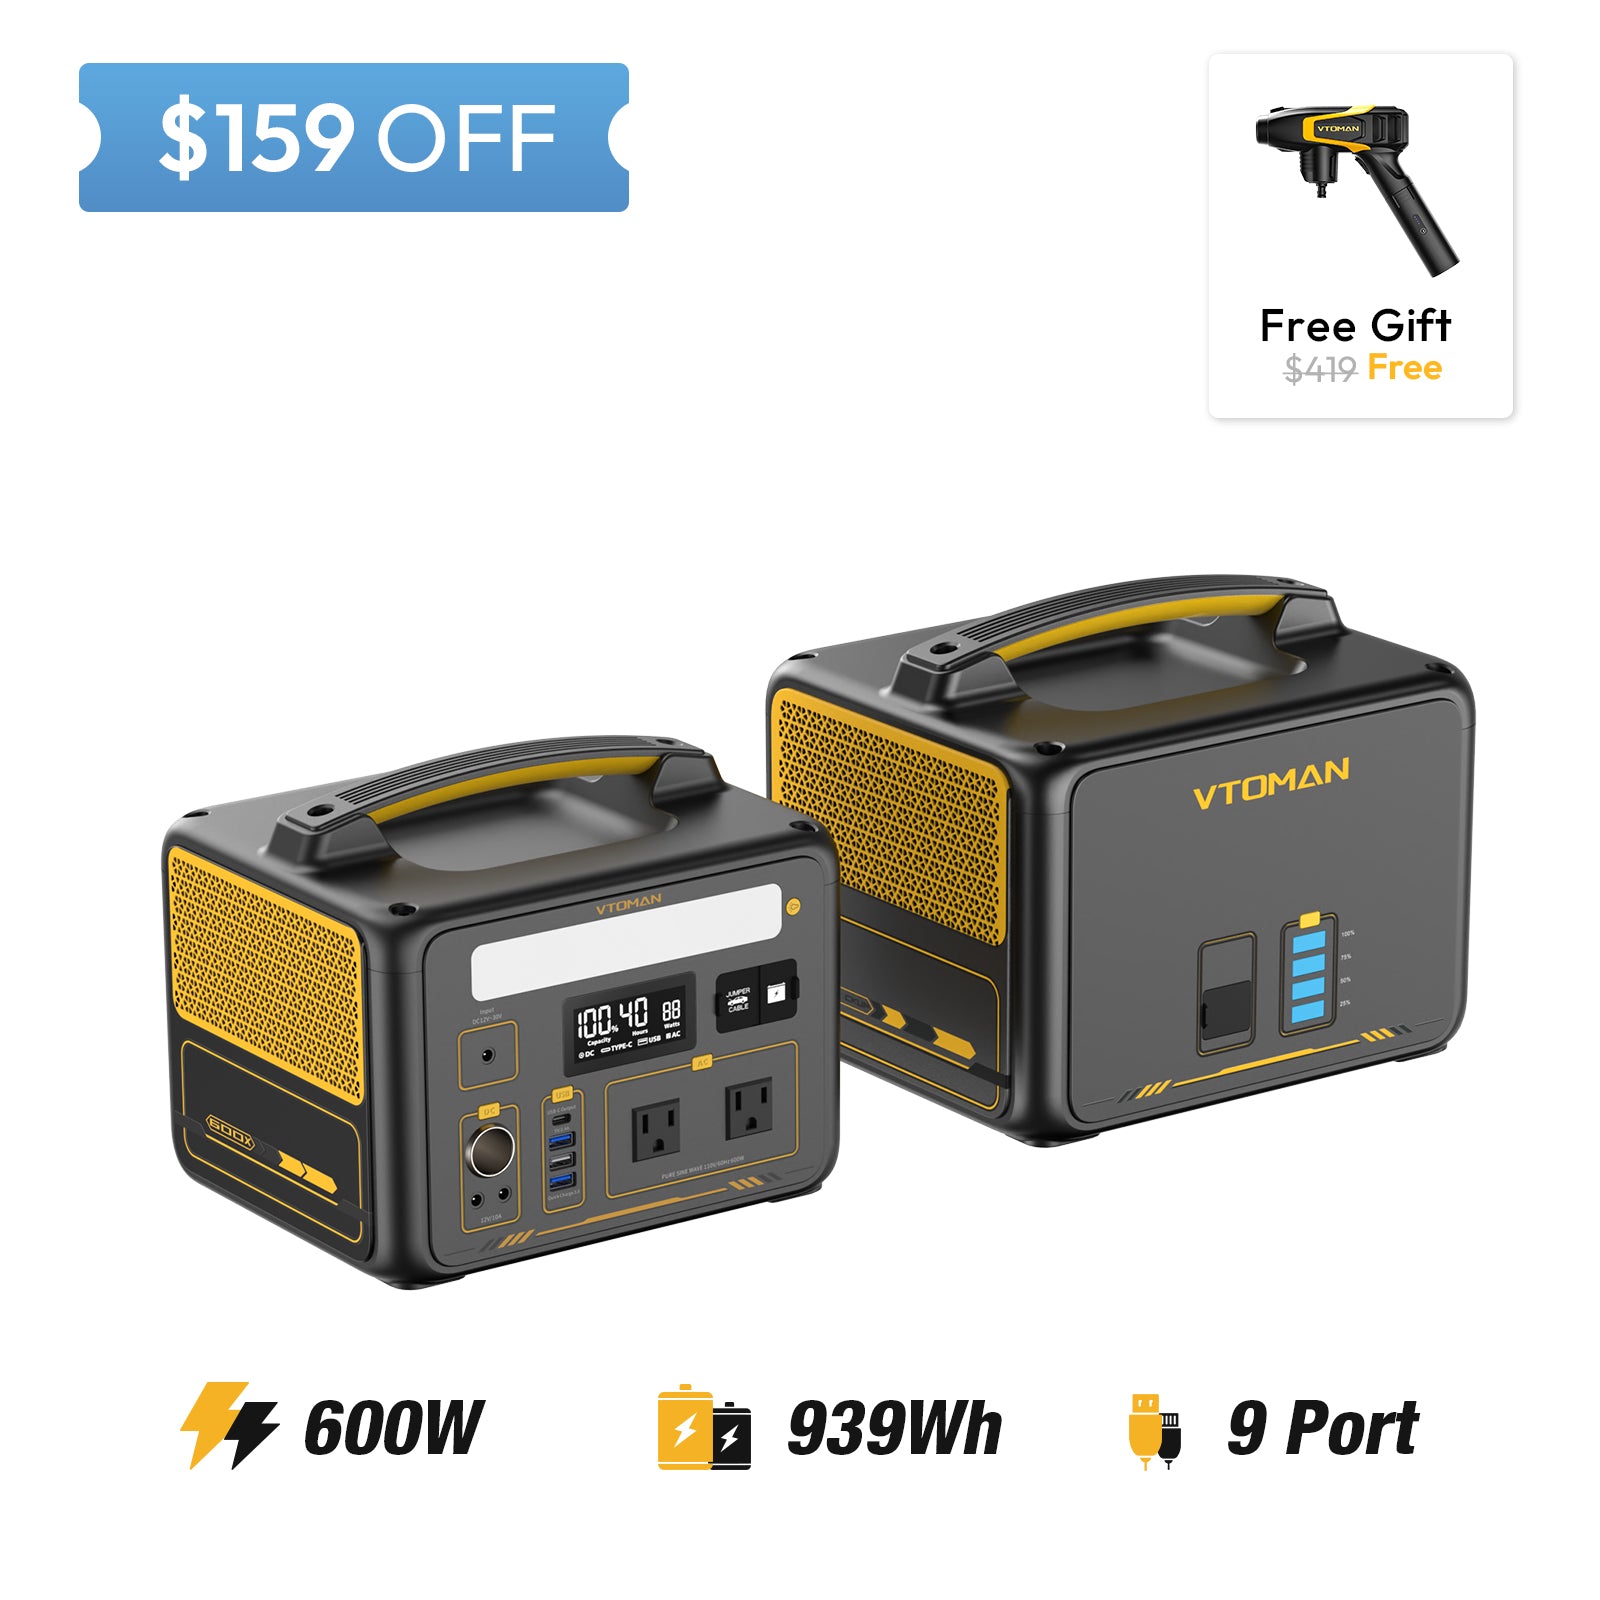 jump 600x and 640wh extra battery save $159 in summer sale